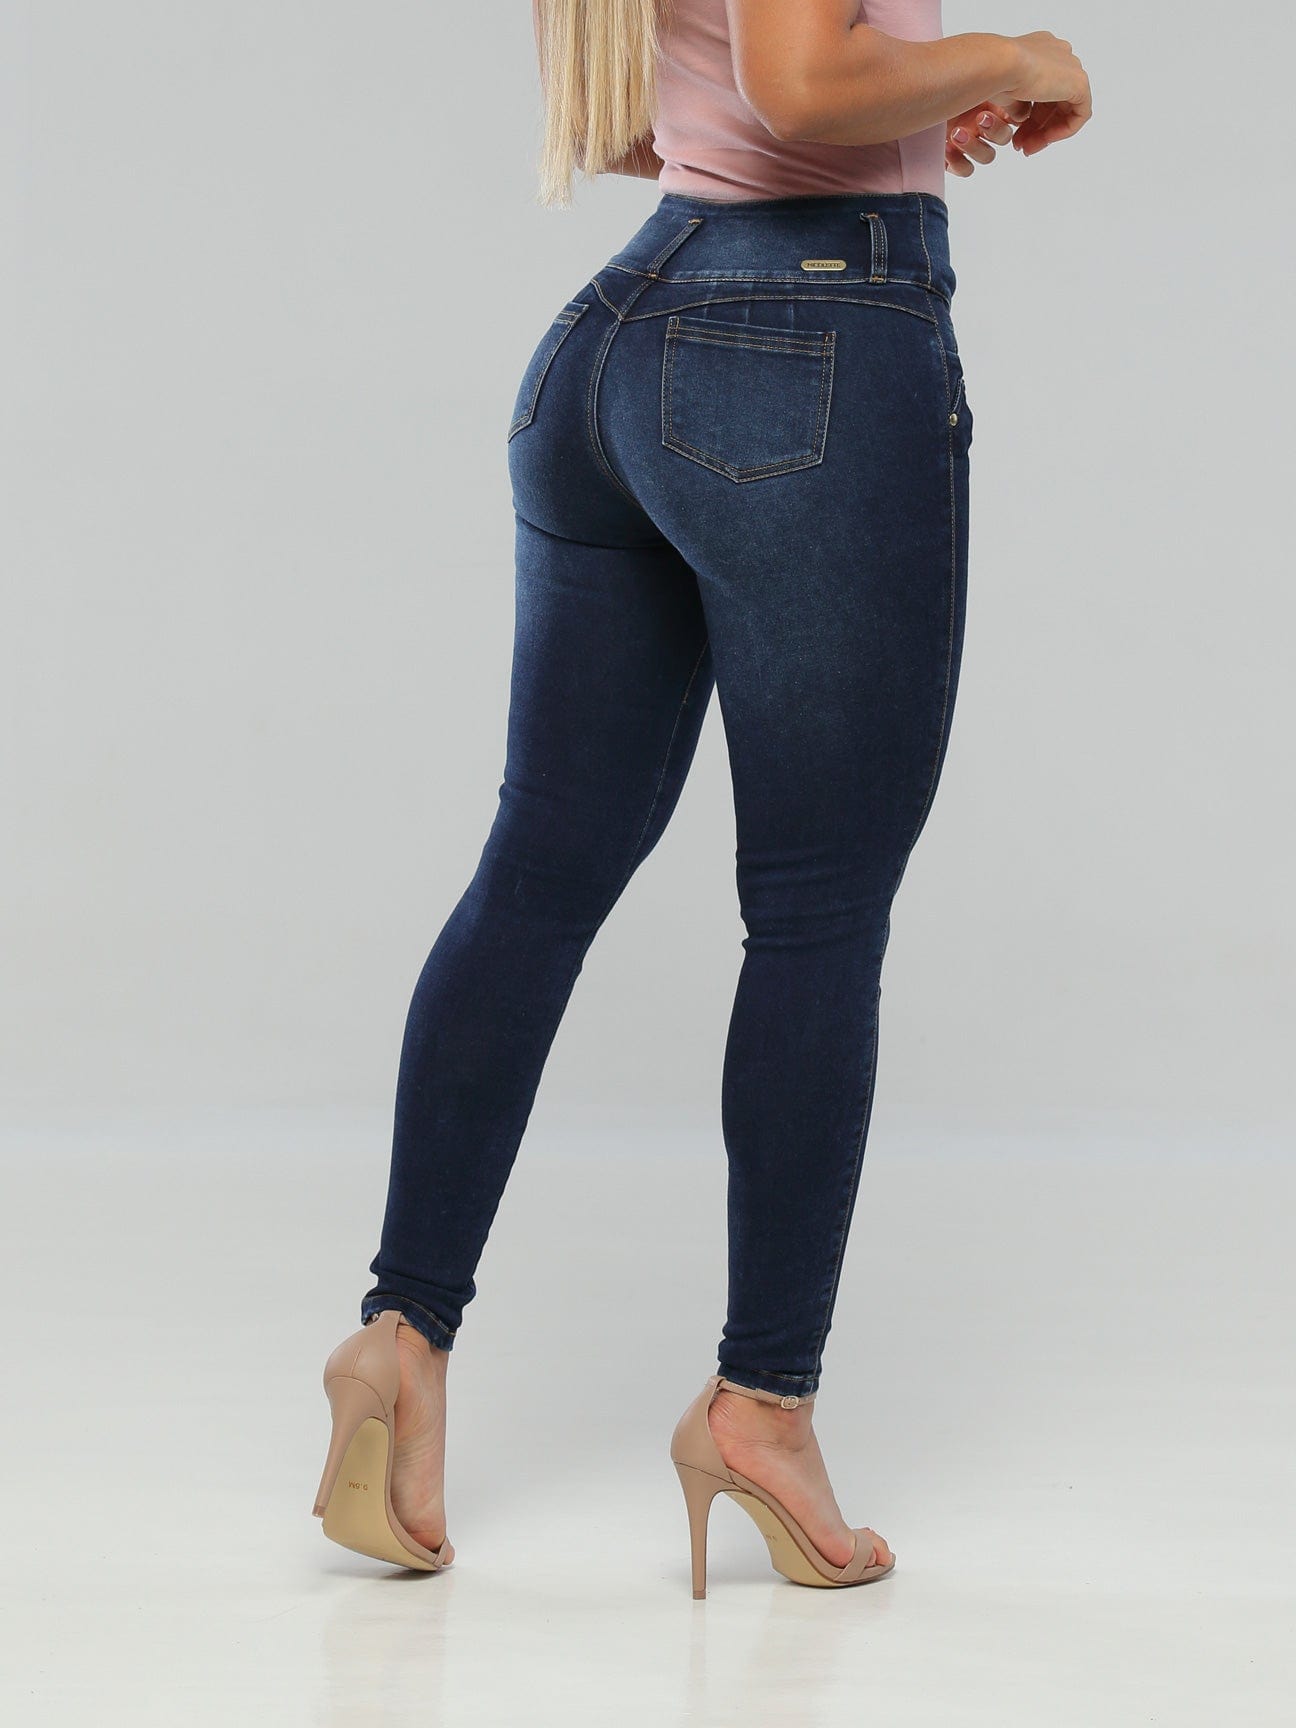 Lowla JE217988 Women High Waisted Butt Lifting Skinny Jeans Colombianos  Levanta Cola with Removable Butt Pads Blue 10